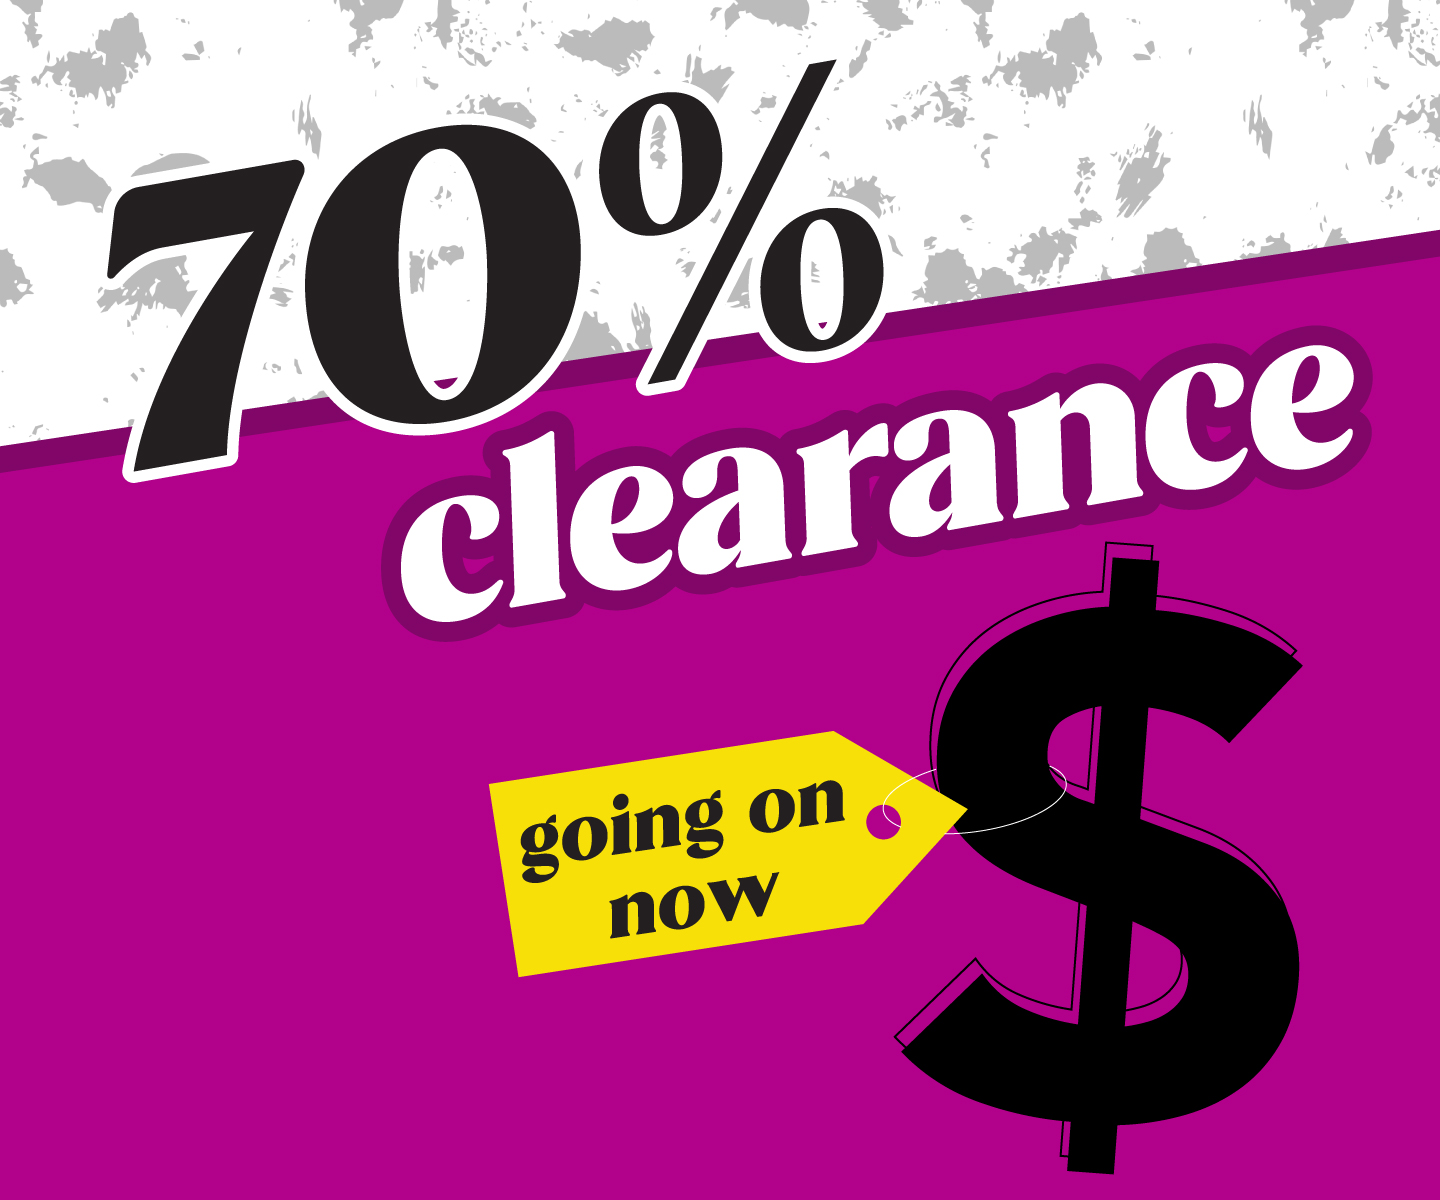 Marked clearance is now 70% OFF! Get it before it's gone!